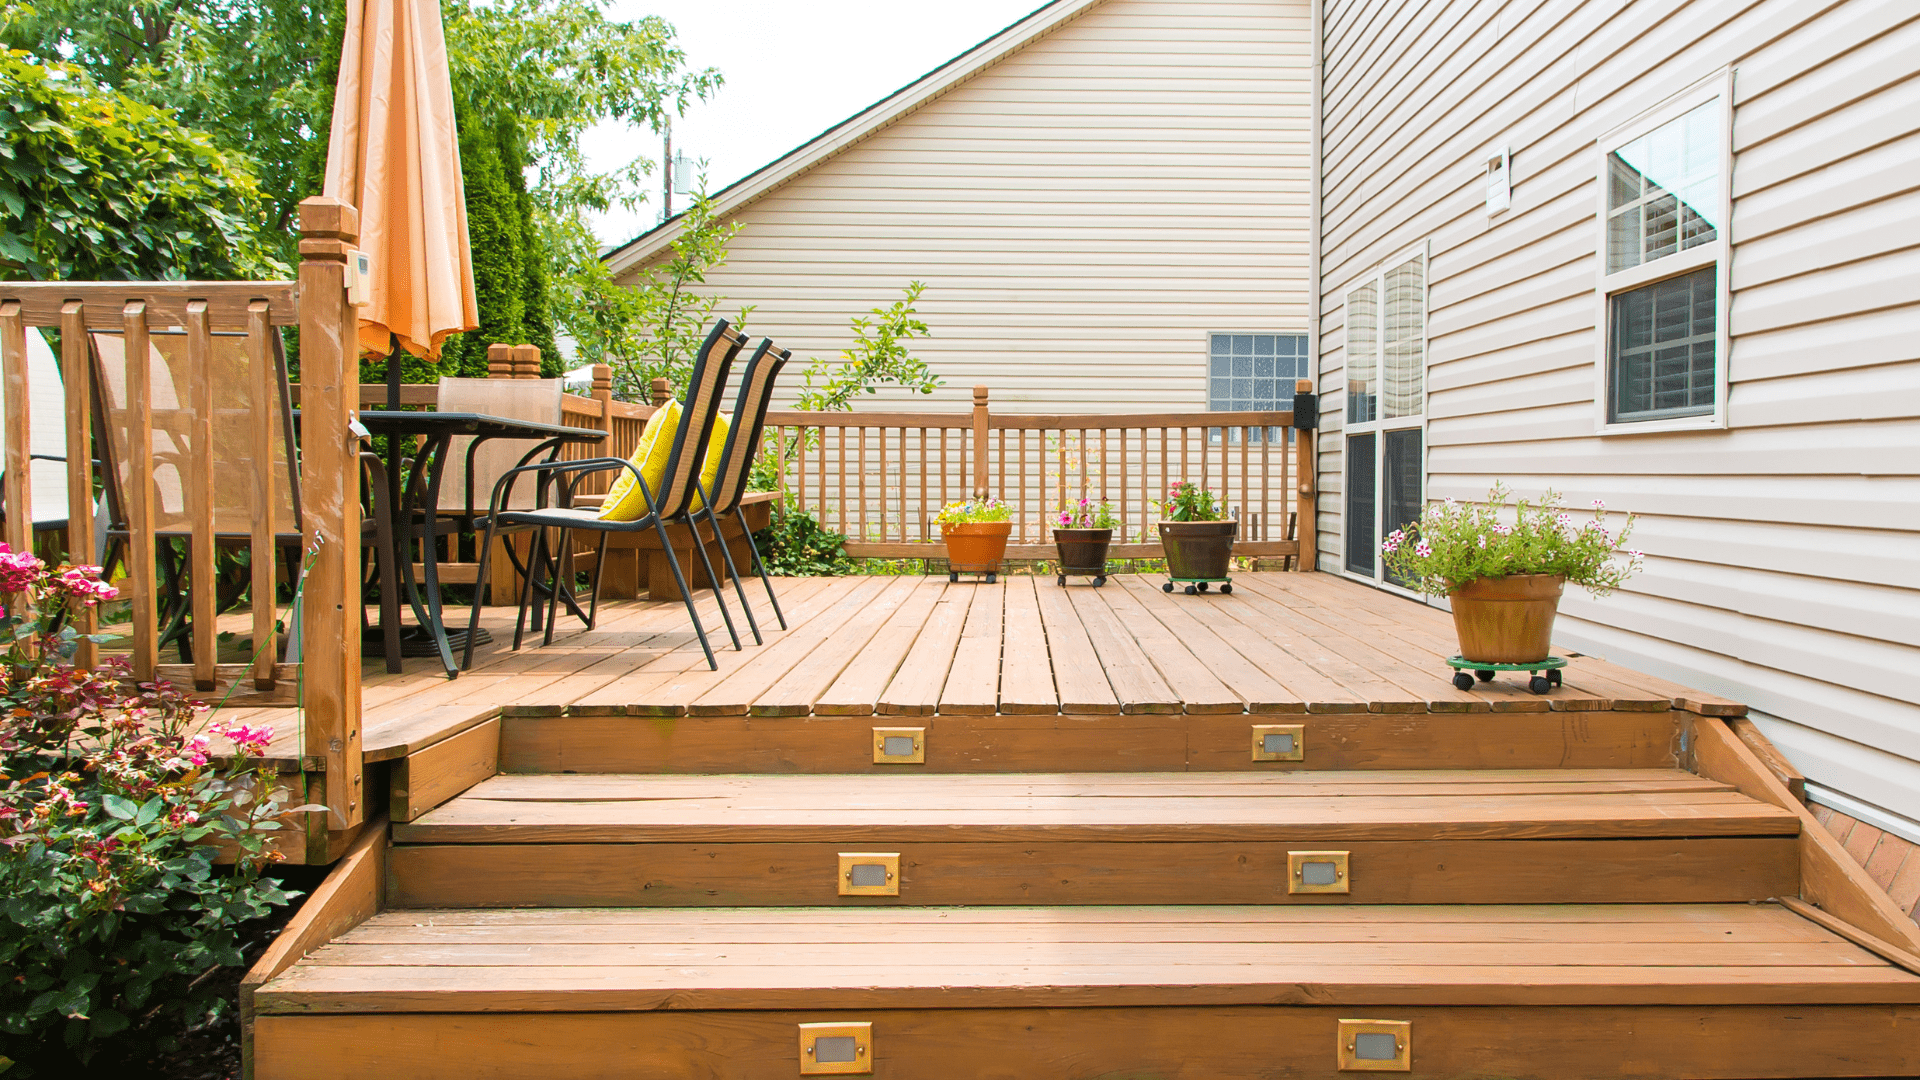 Safety First: How to Prevent Accidents and Injuries on Your Deck